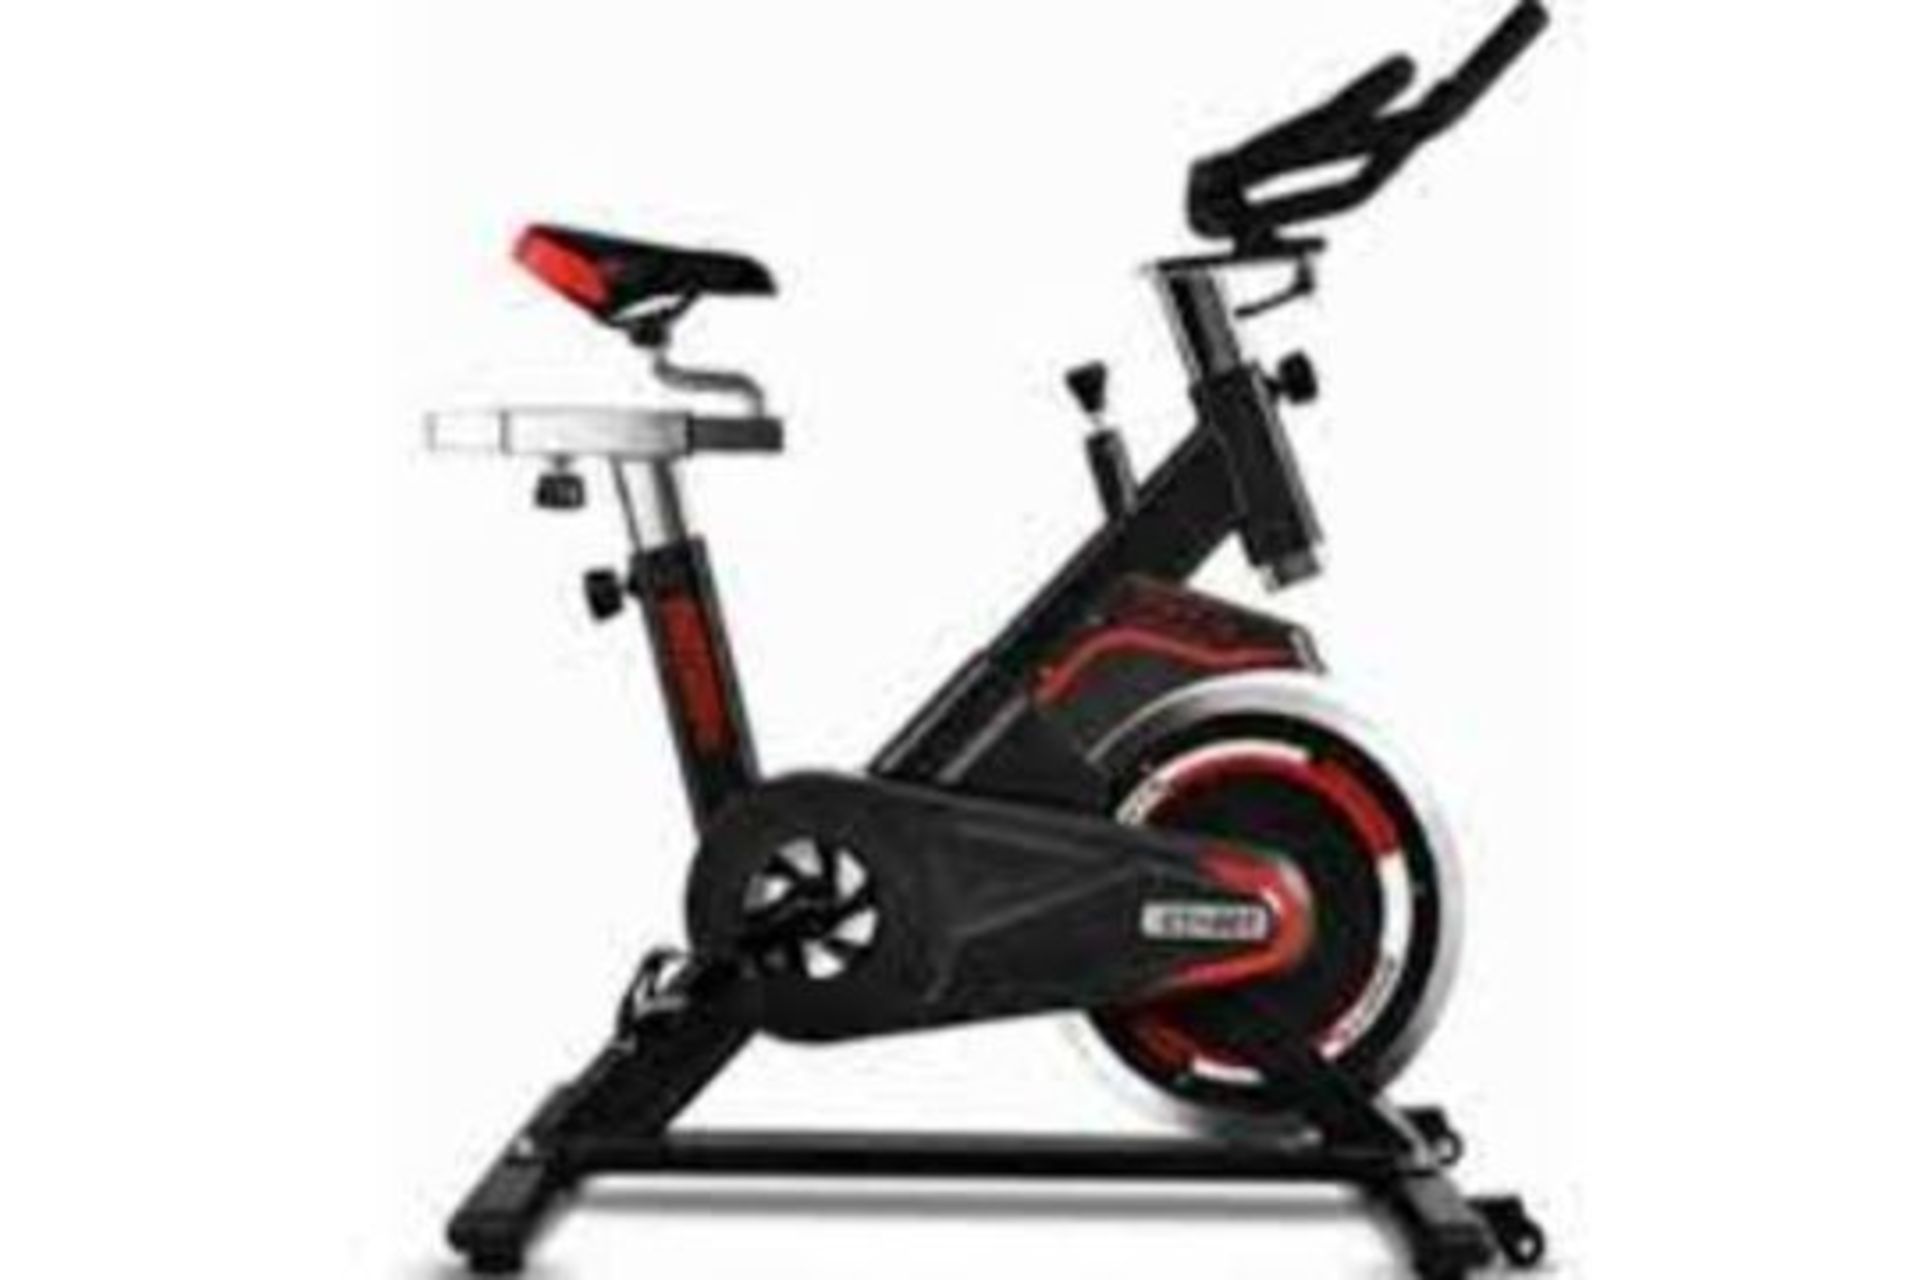 PALLET TO INCLUDE 5 X BRAND NEW INDOOR CYCLING BICYCLE BELT DRIVE EXERCISE BIKE WITH FLYWHEEL AND